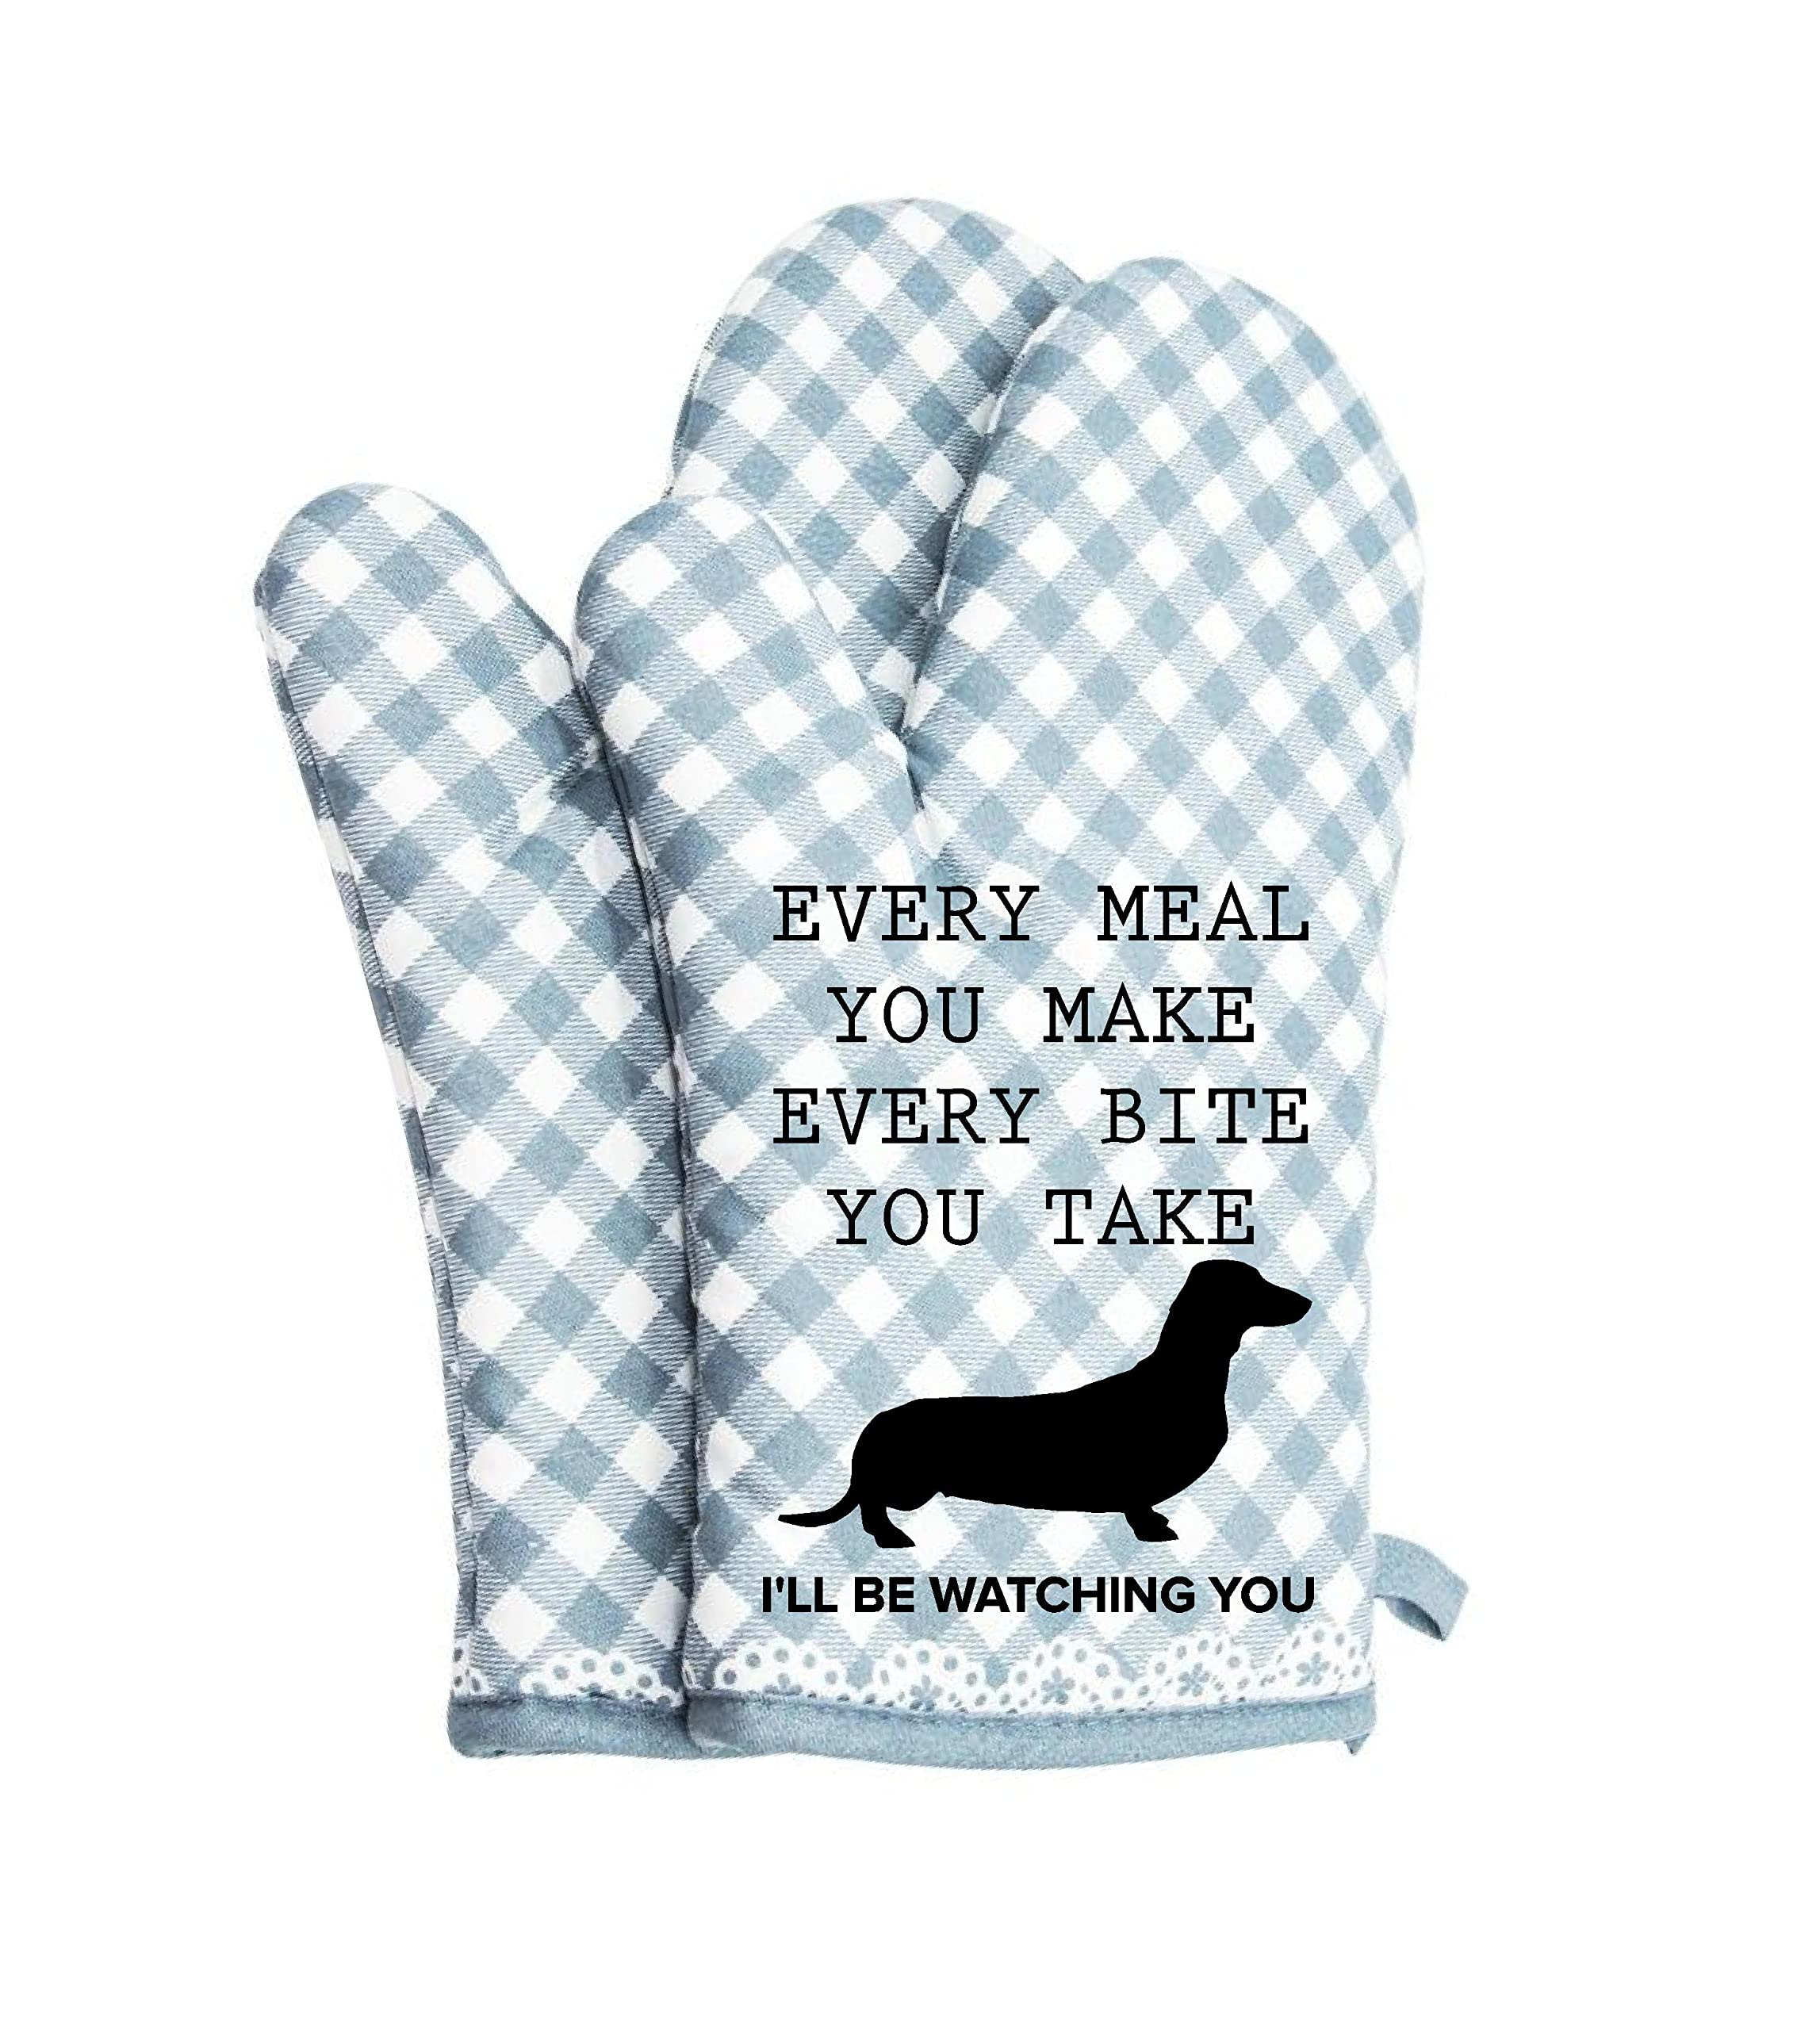 Oven mitts cute pair kitchen Potholders BBQ Gloves cooking baking grilling non slip cotton BLUE (Dachshund)